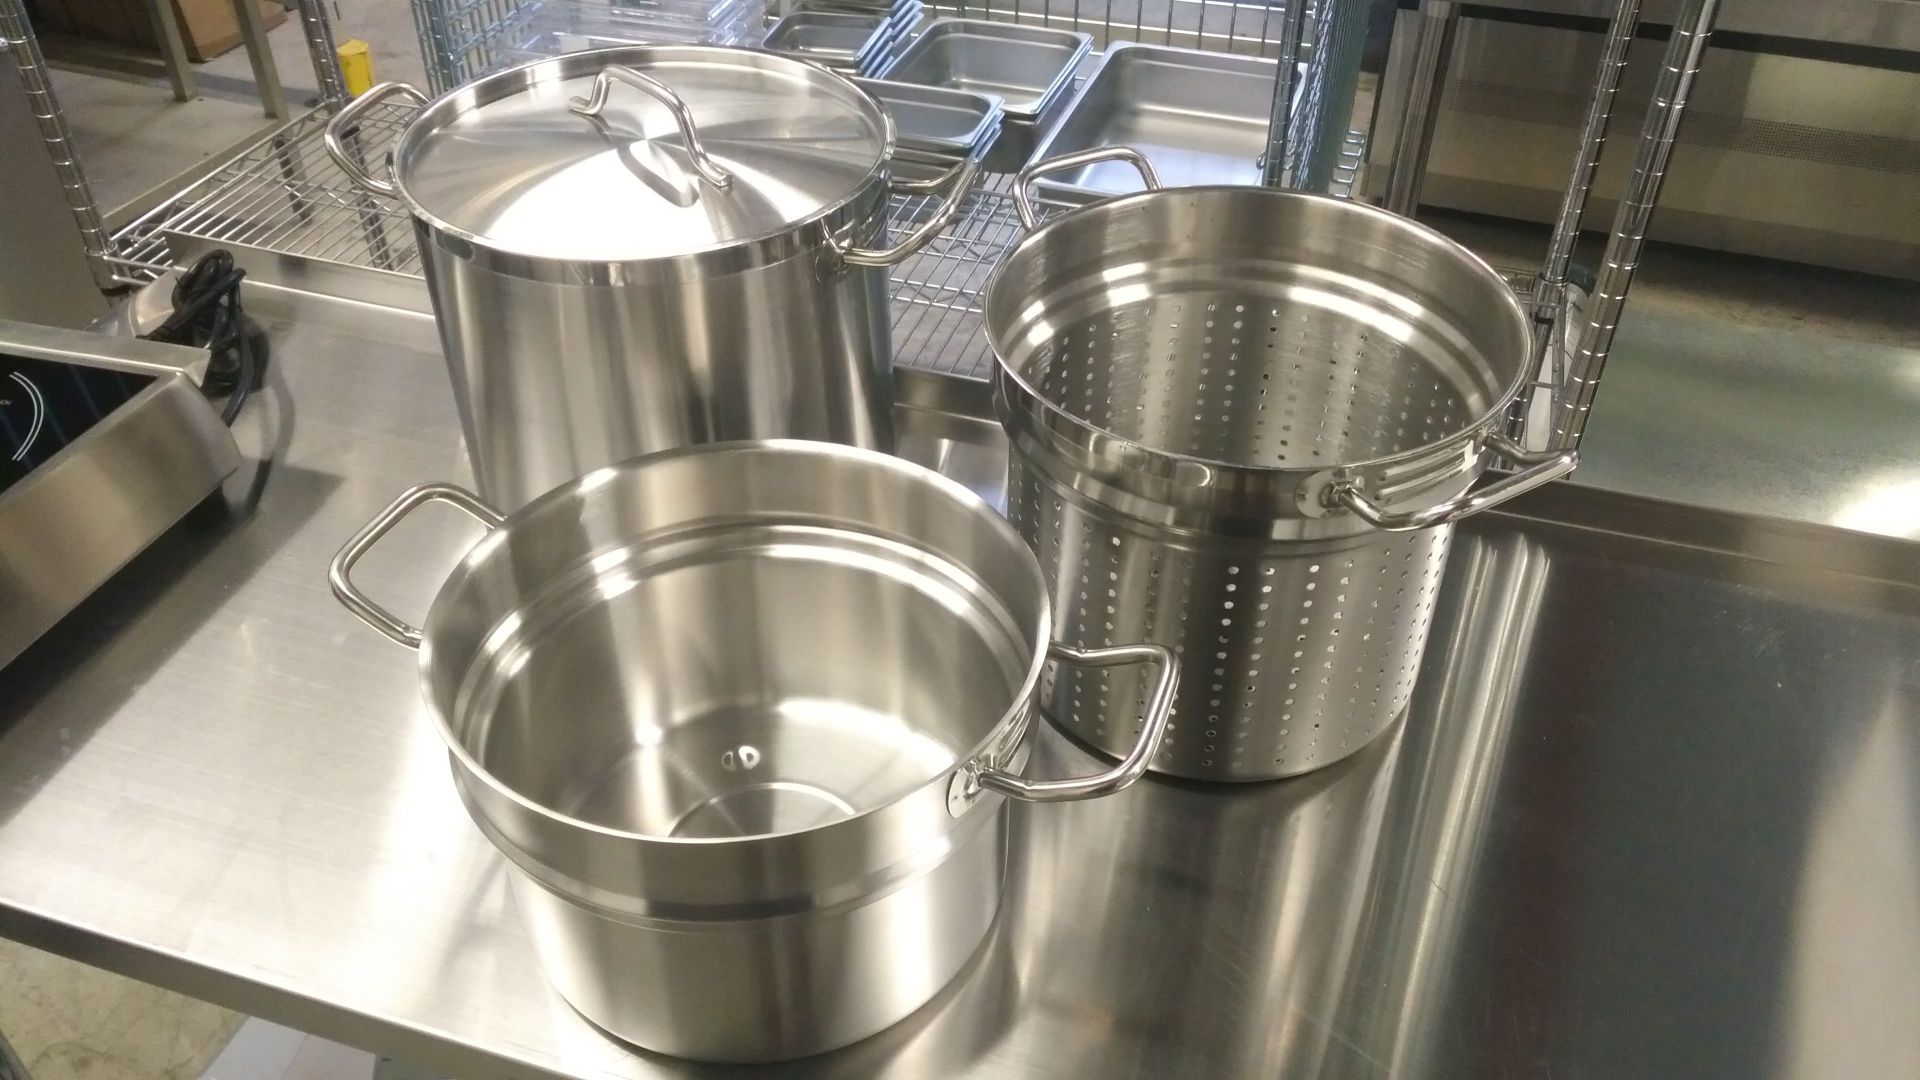 20qt Heavy Duty Stainless Stock Pot with Steamer Basket and Double Boiler - Image 3 of 6